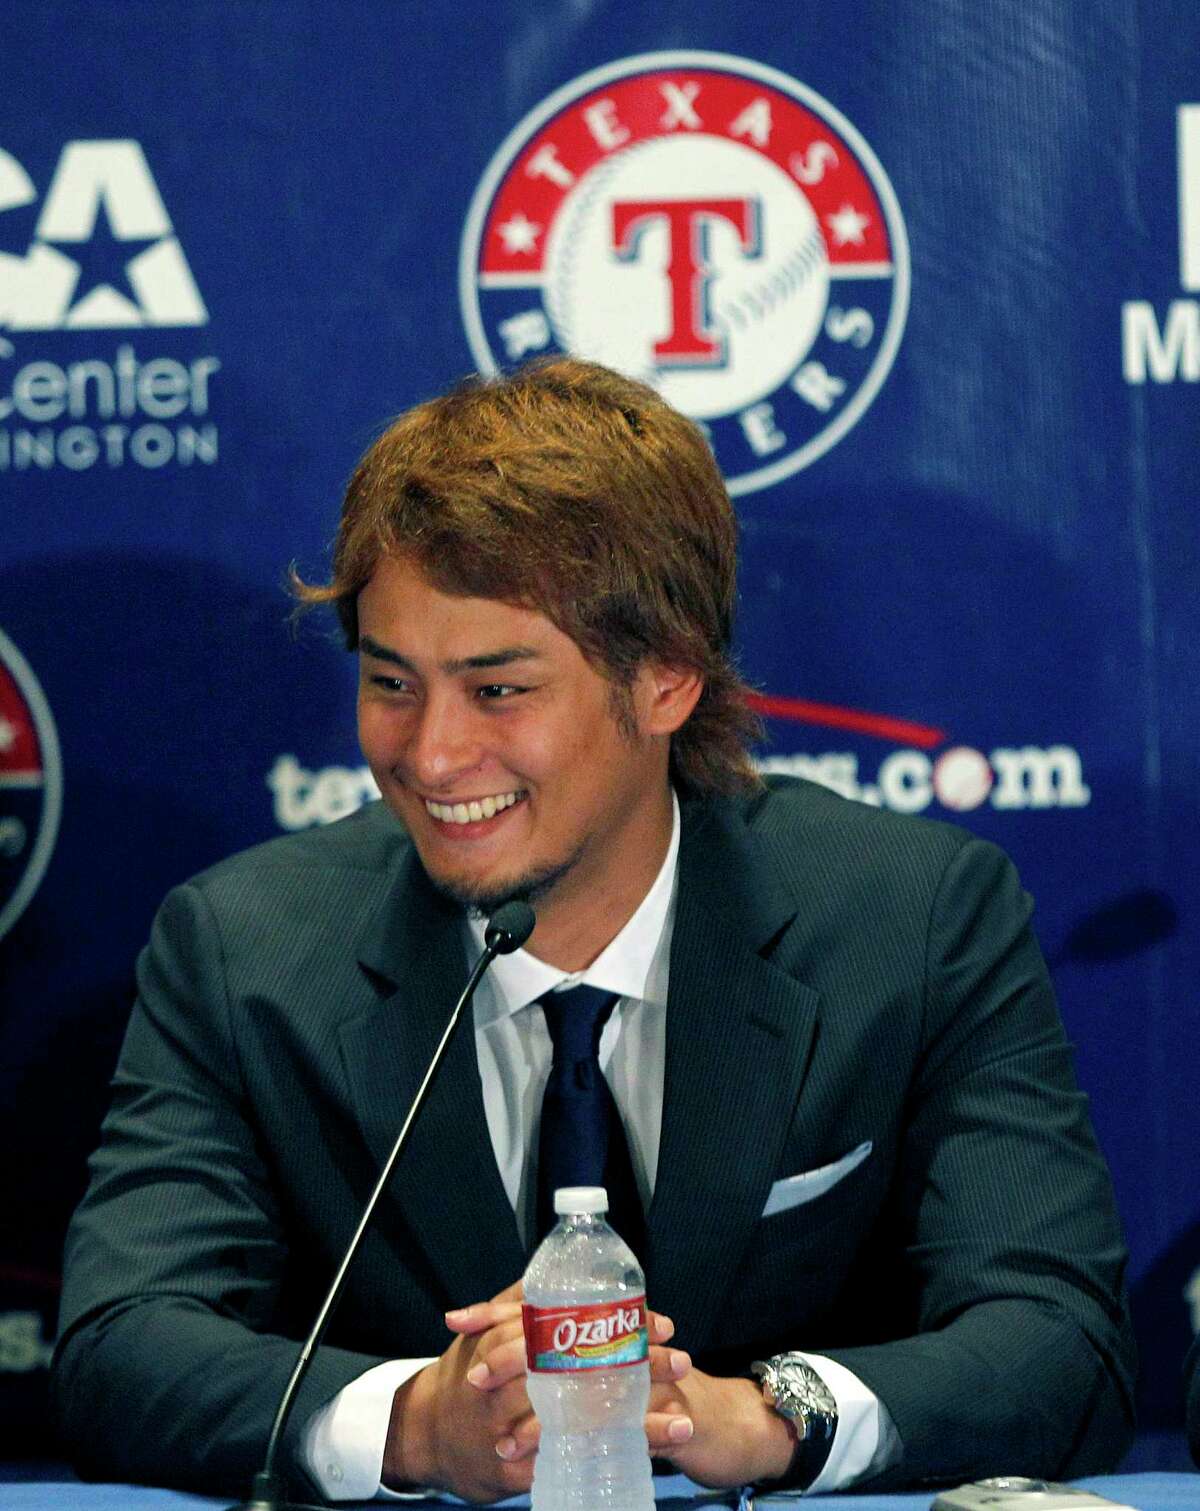 FILE - In this Jan. 20, 2012, file photo, new Texas Rangers baseball pitcher Yu Darvish smiles during a news conference at Rangers Ballpark in Arlington, Texas. When Yu Darvish arrived in Texas from Japan in 2012, the Rangers were coming off consecutive World Series appearances. With a third straight AL West title long out of reach, and the push for a wild card becoming ever more difficult with each loss, the Rangers dealt the pitcher they spent more than two years scouting and more than $107 million to acquire for three minor league players.(AP Photo/LM Otero, File)